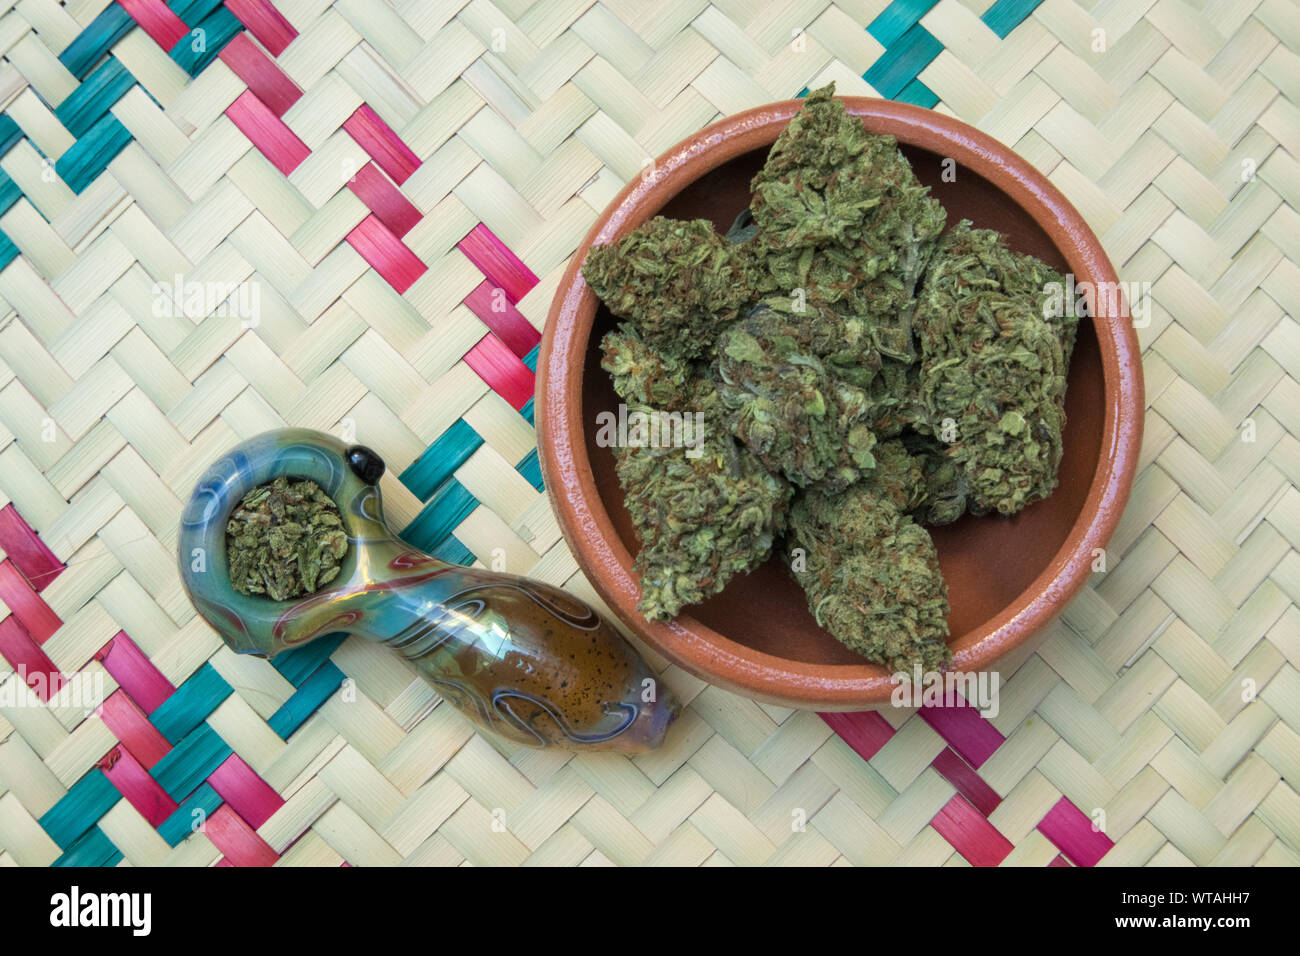 Smoking Pipe And Cannabis Leaves. Smoking Mix Of Marijuana, Medicine And  Recreational Drug. Stock Photo, Picture and Royalty Free Image. Image  124438073.